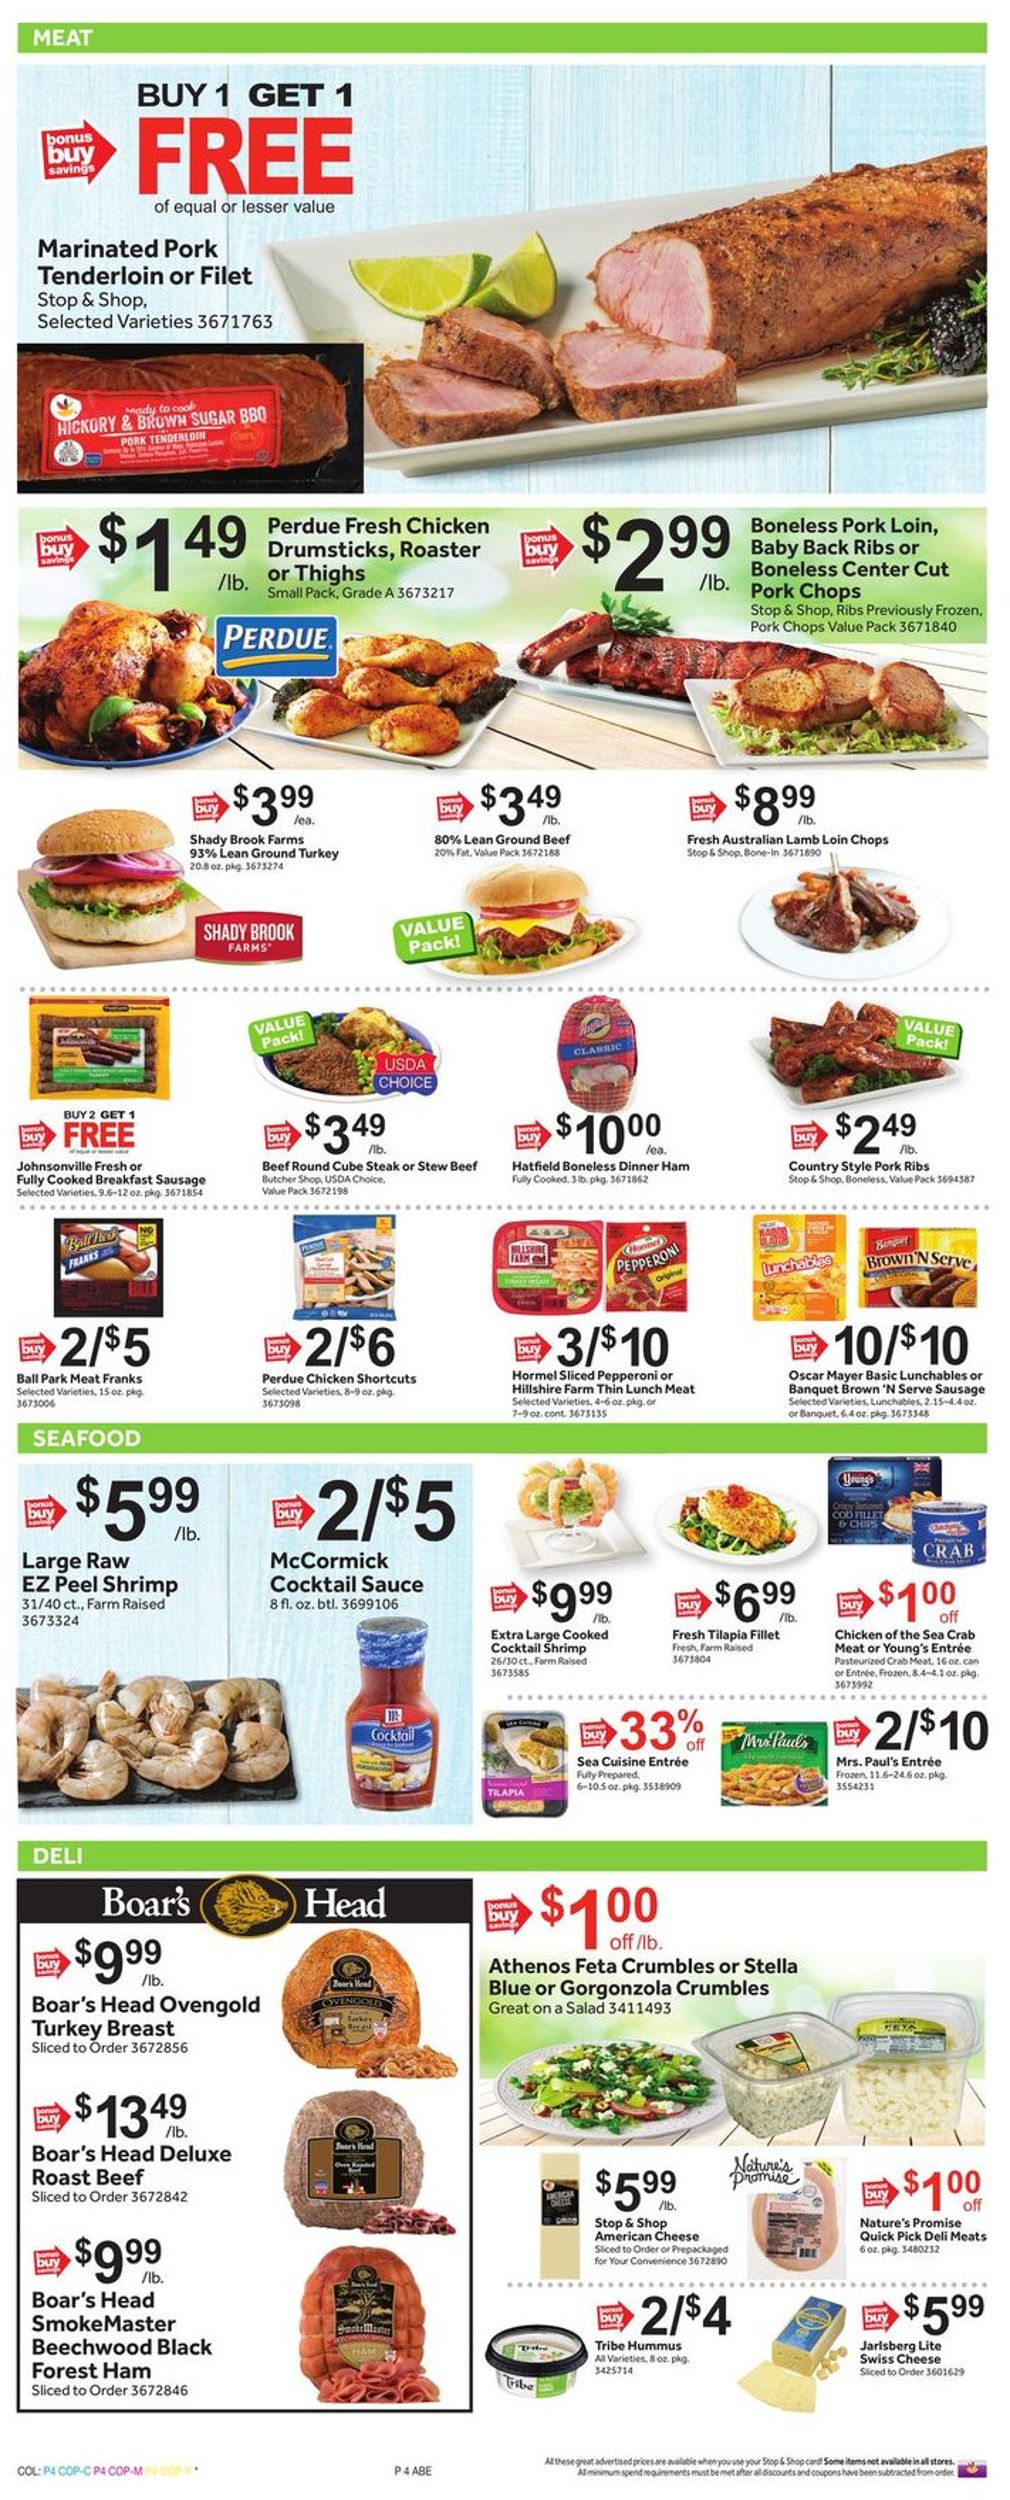 Stop and Shop Current weekly ad 05/31 - 06/06/2019 [8] - frequent-ads.com